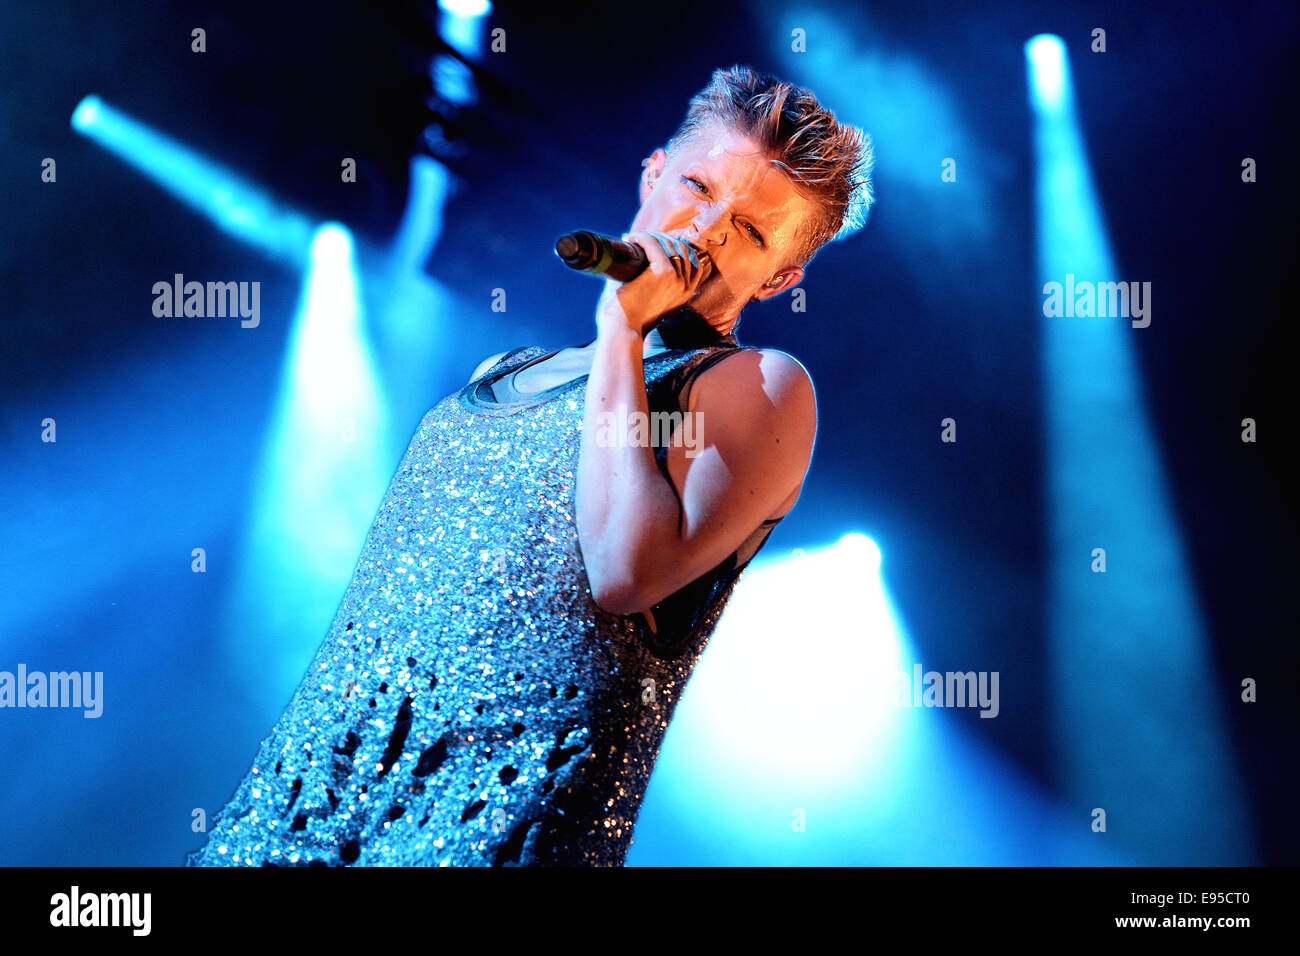 BARCELONA - JUN 13: Royksopp & Robyn (electronic band from Sweden and Norway) performs at Sonar Festival. Stock Photo